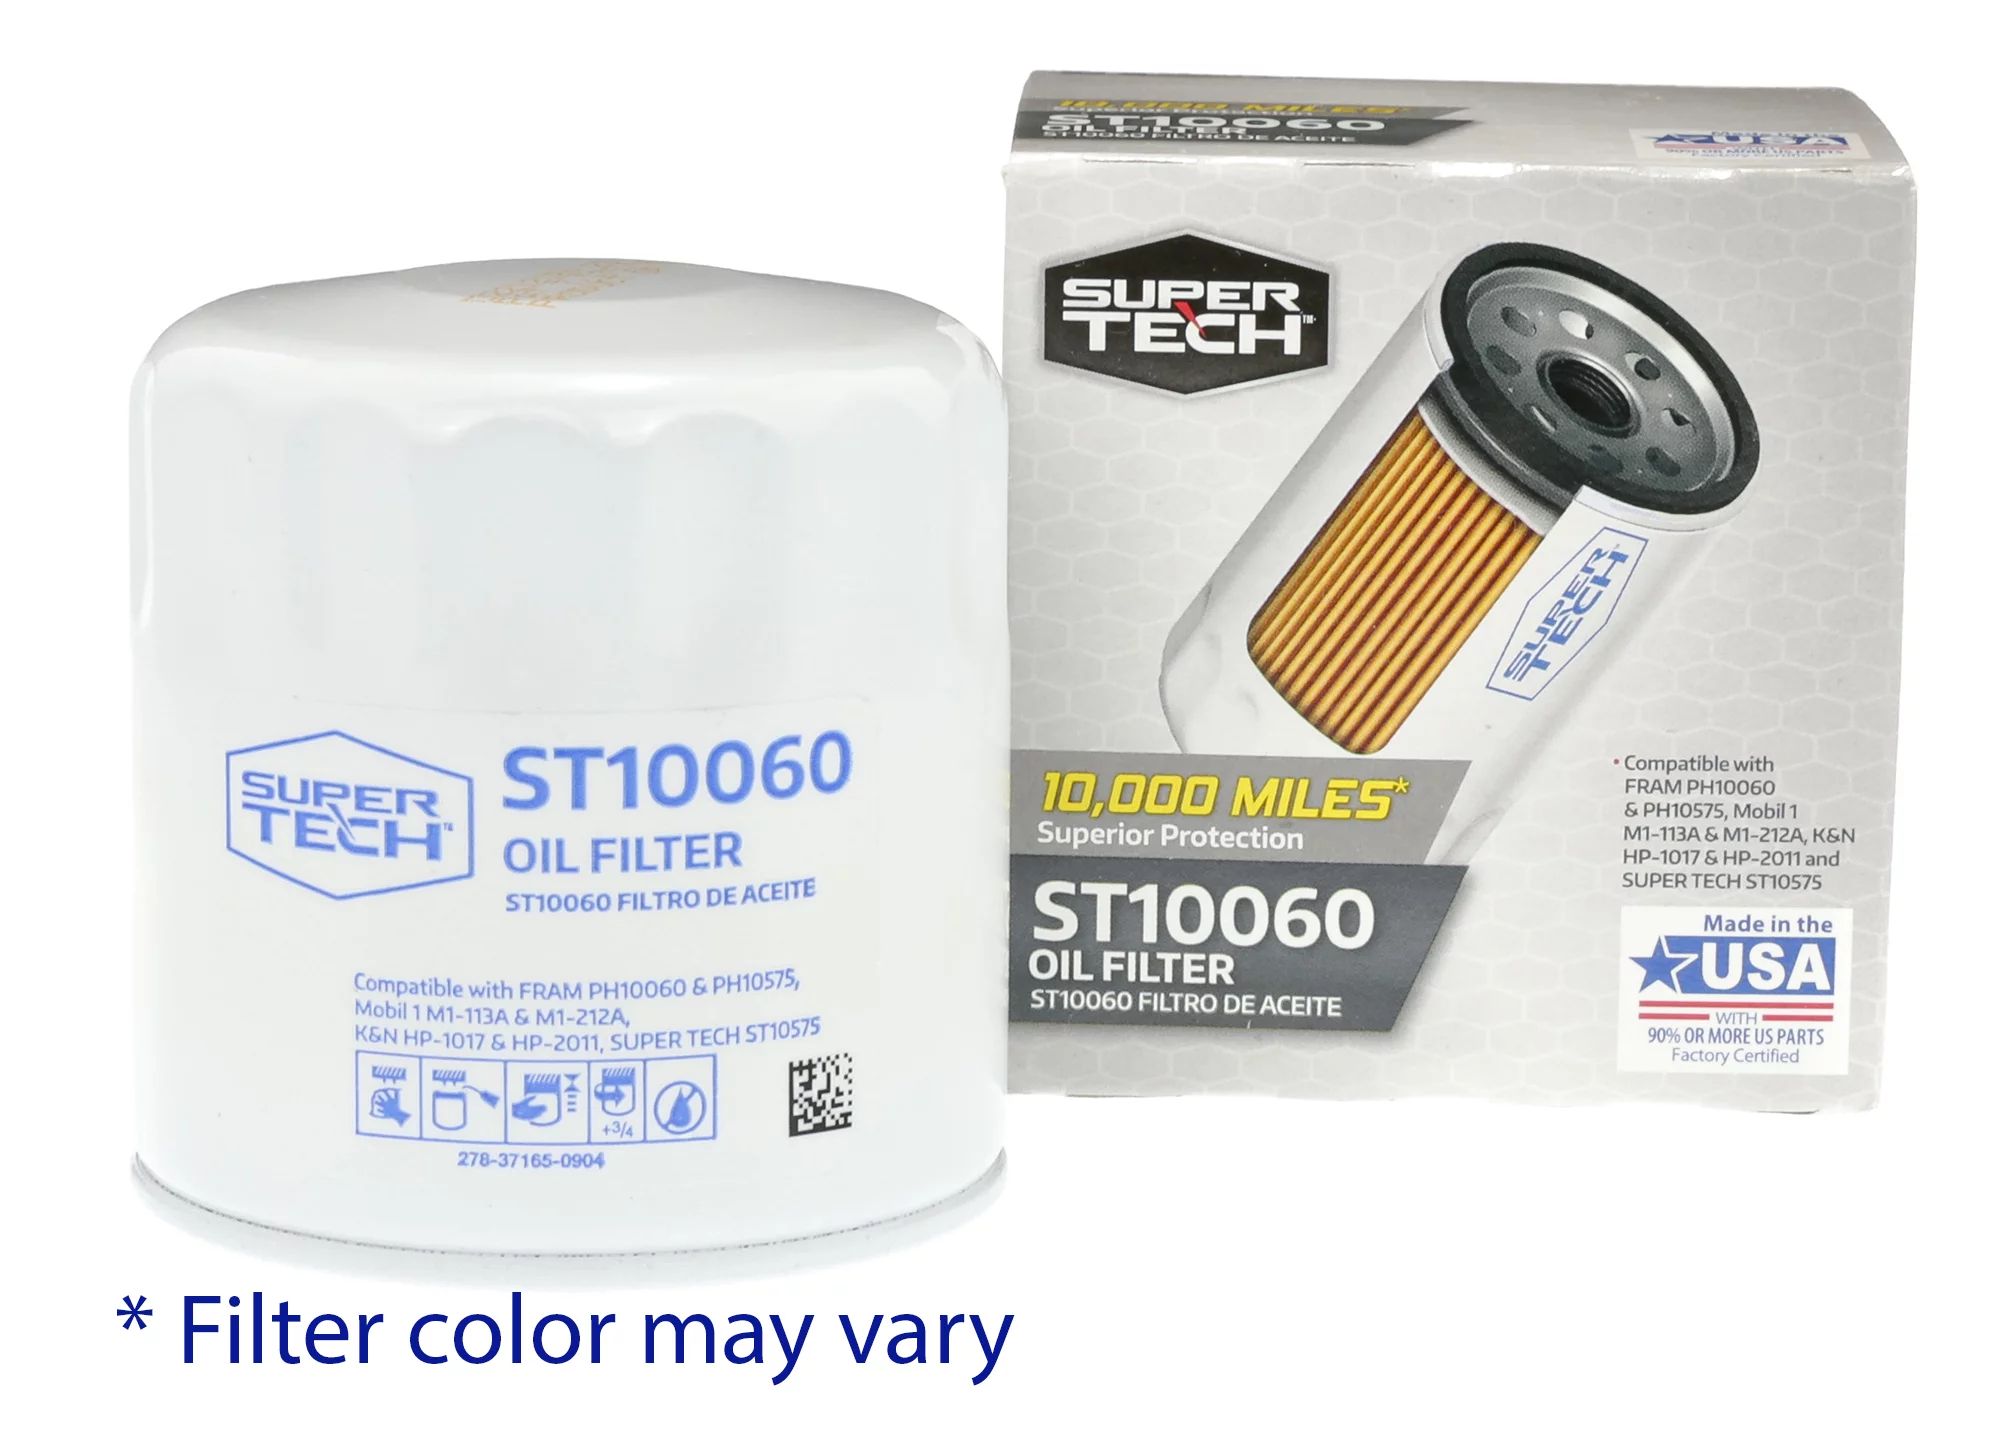 Super Tech ST10060 10K mile Oil Filter for Buick, Cadillac, Chevrolet, GMC, Chrysler, Dodge and Jeep